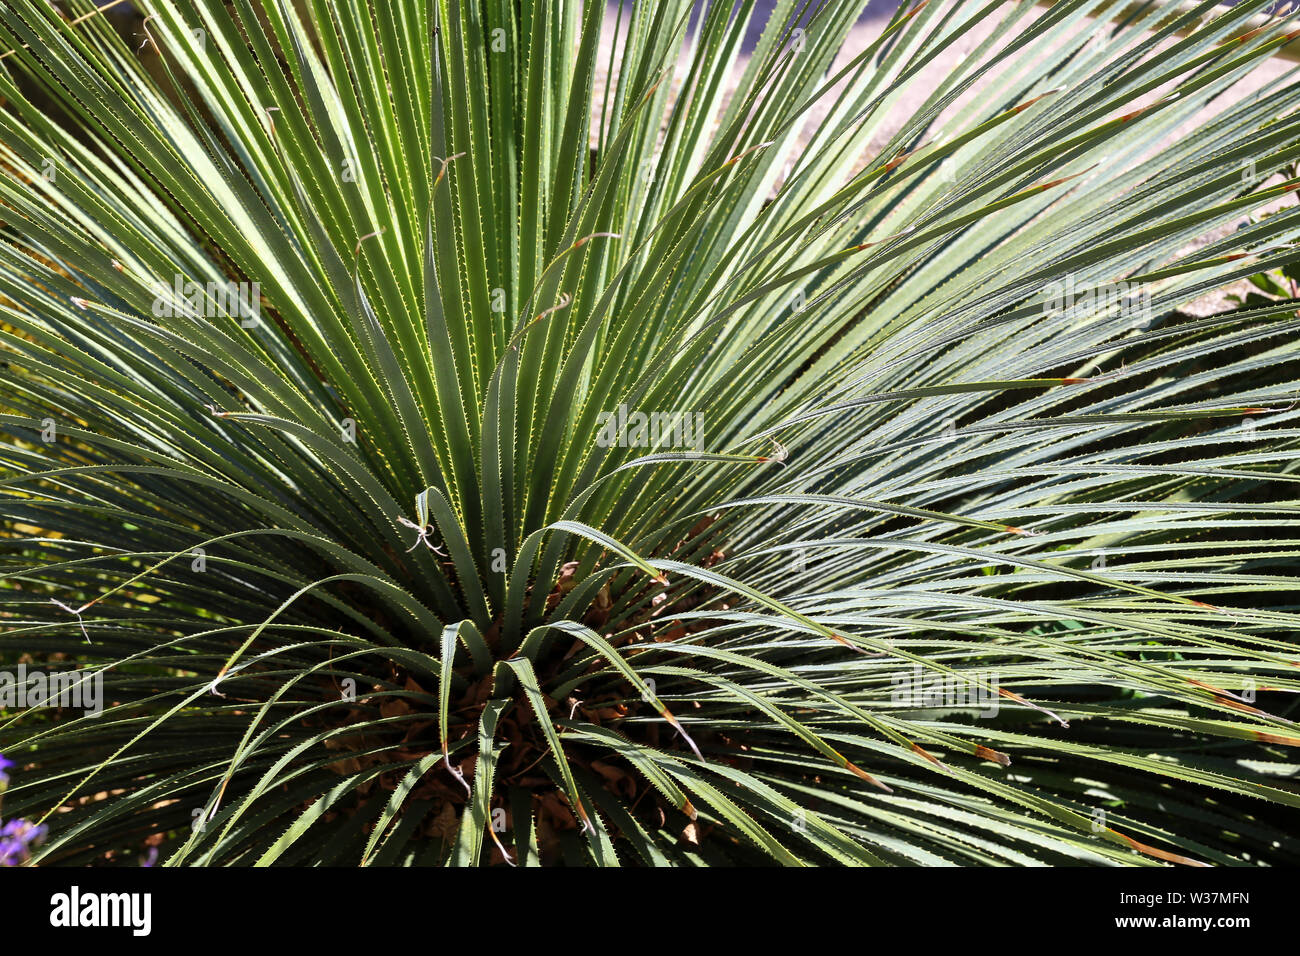 Dasylirion wheeleri. Desert Mexican plant with spiked long leaves. Beautiful green floral background. Stock Photo